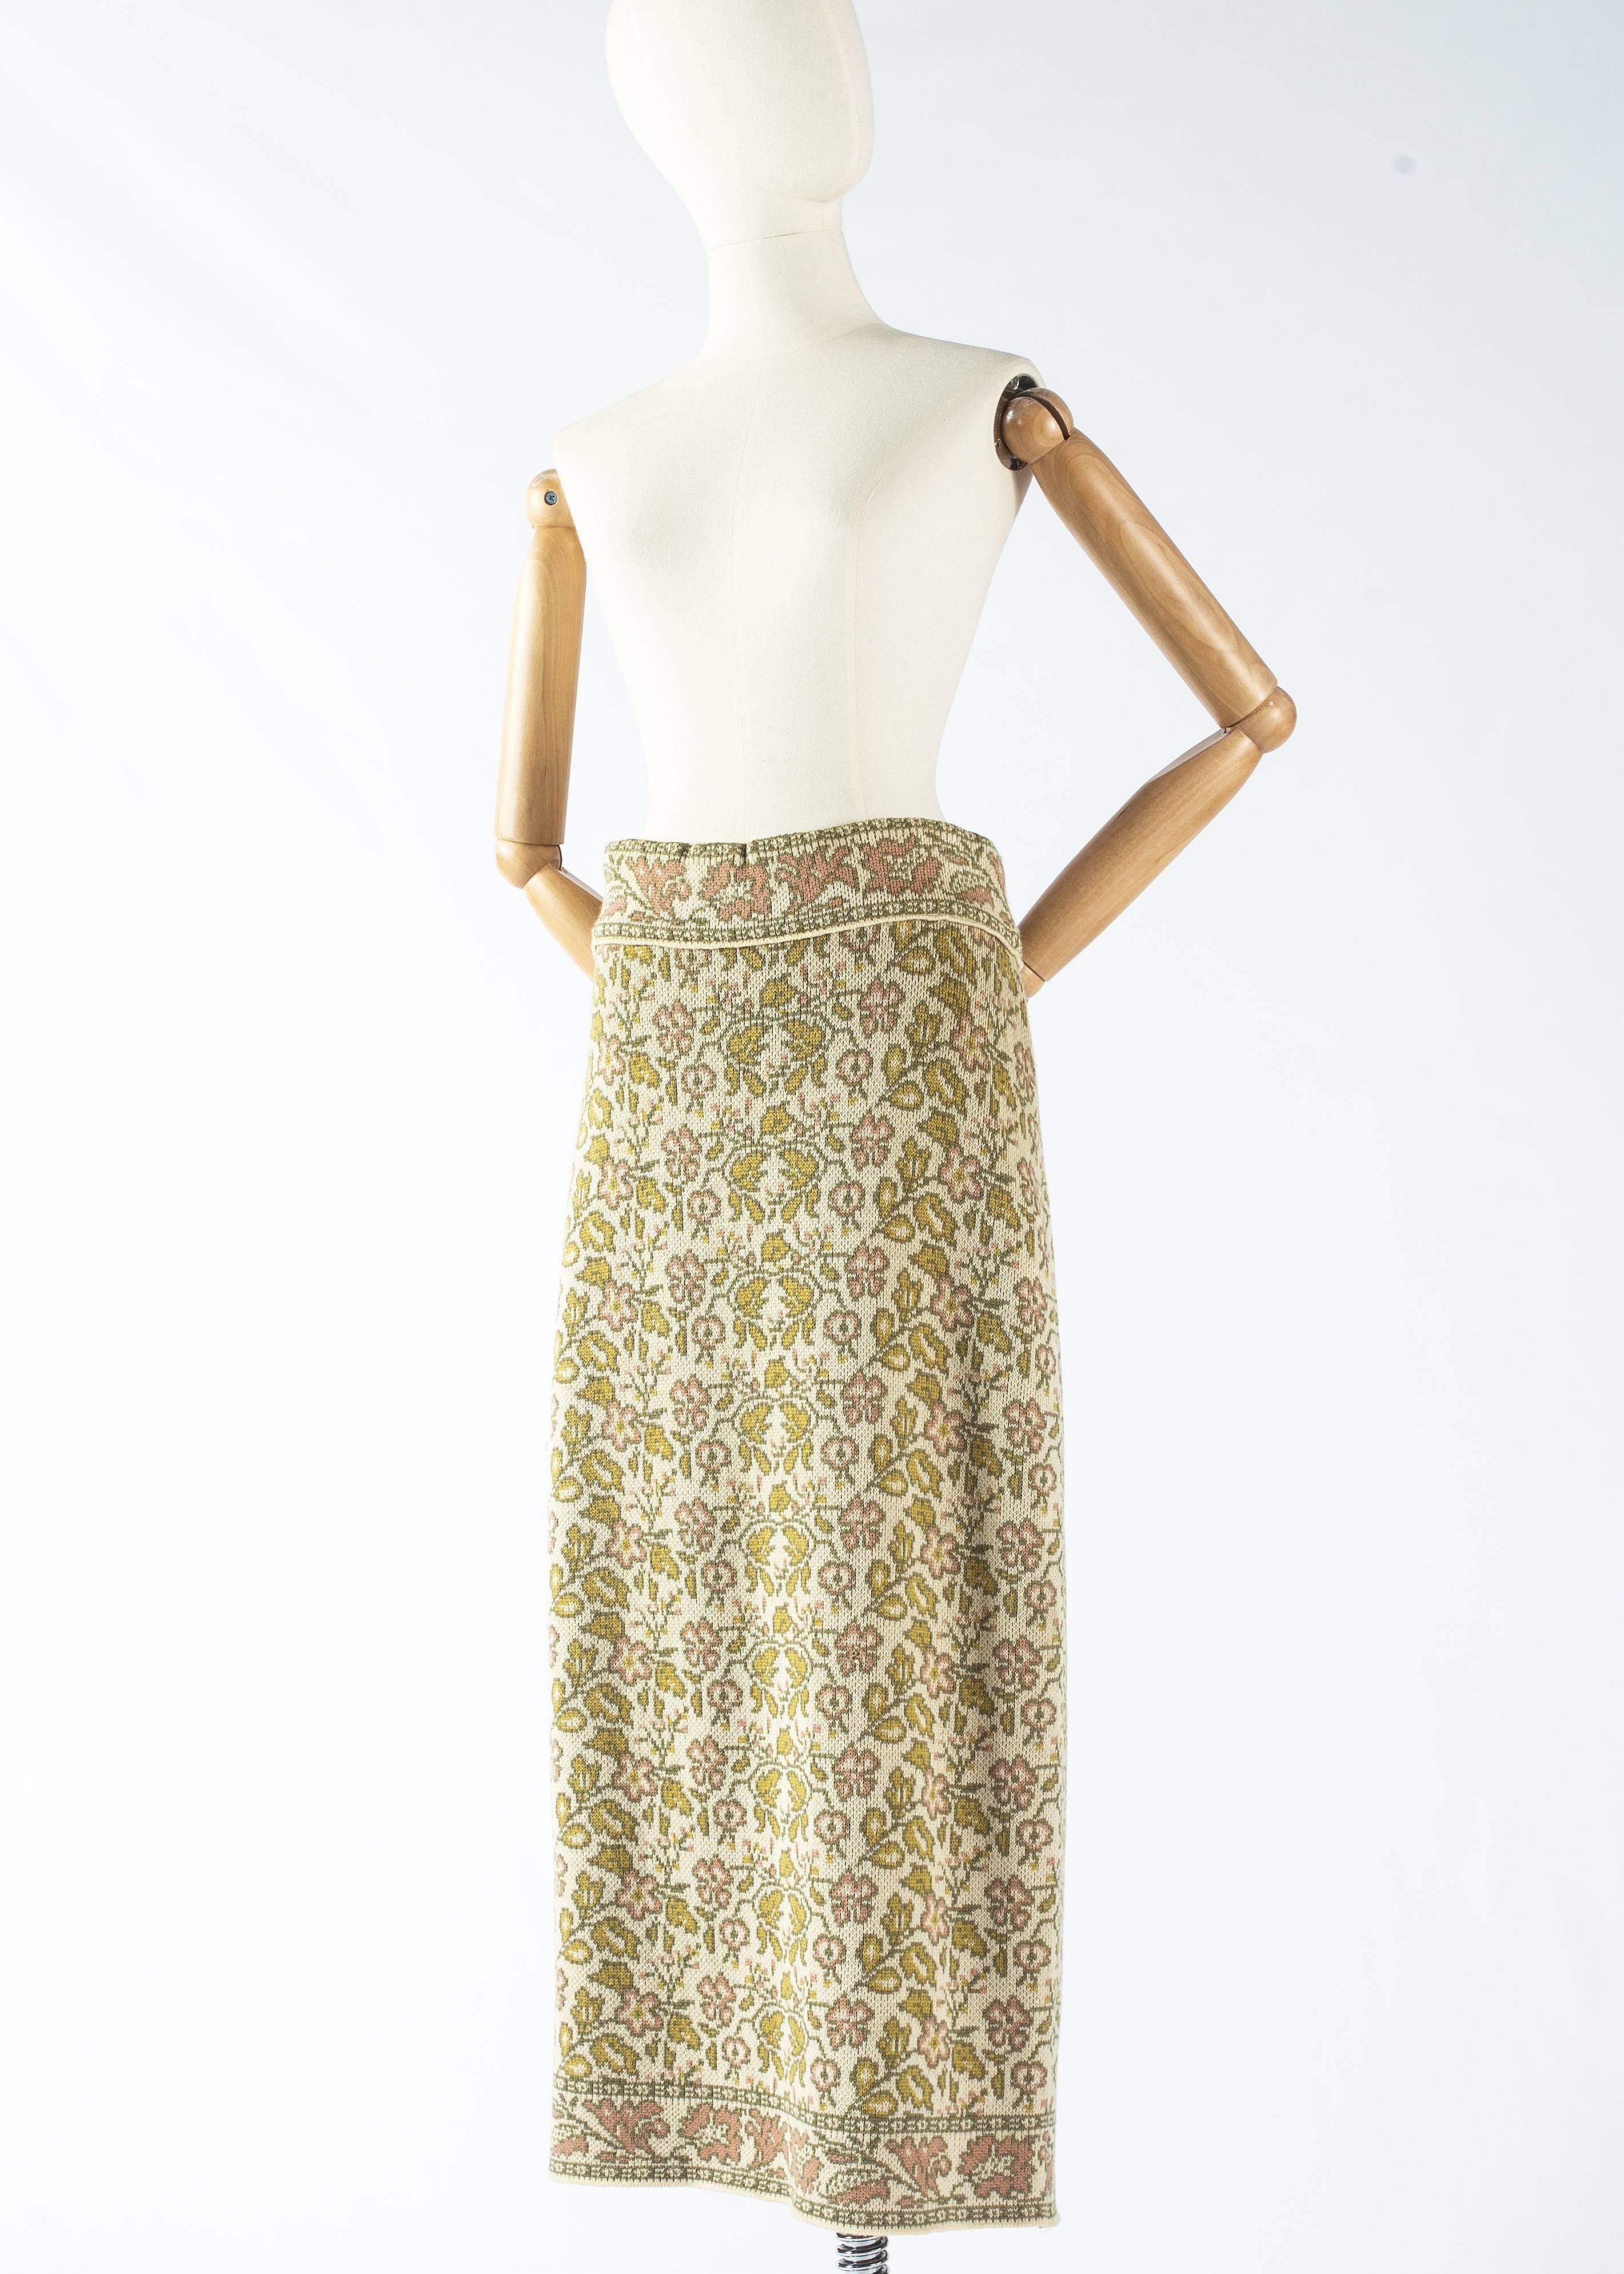 Gray Jean Paul Gaultier floral tapestry cable-knit sweater and skirt, aw 1984